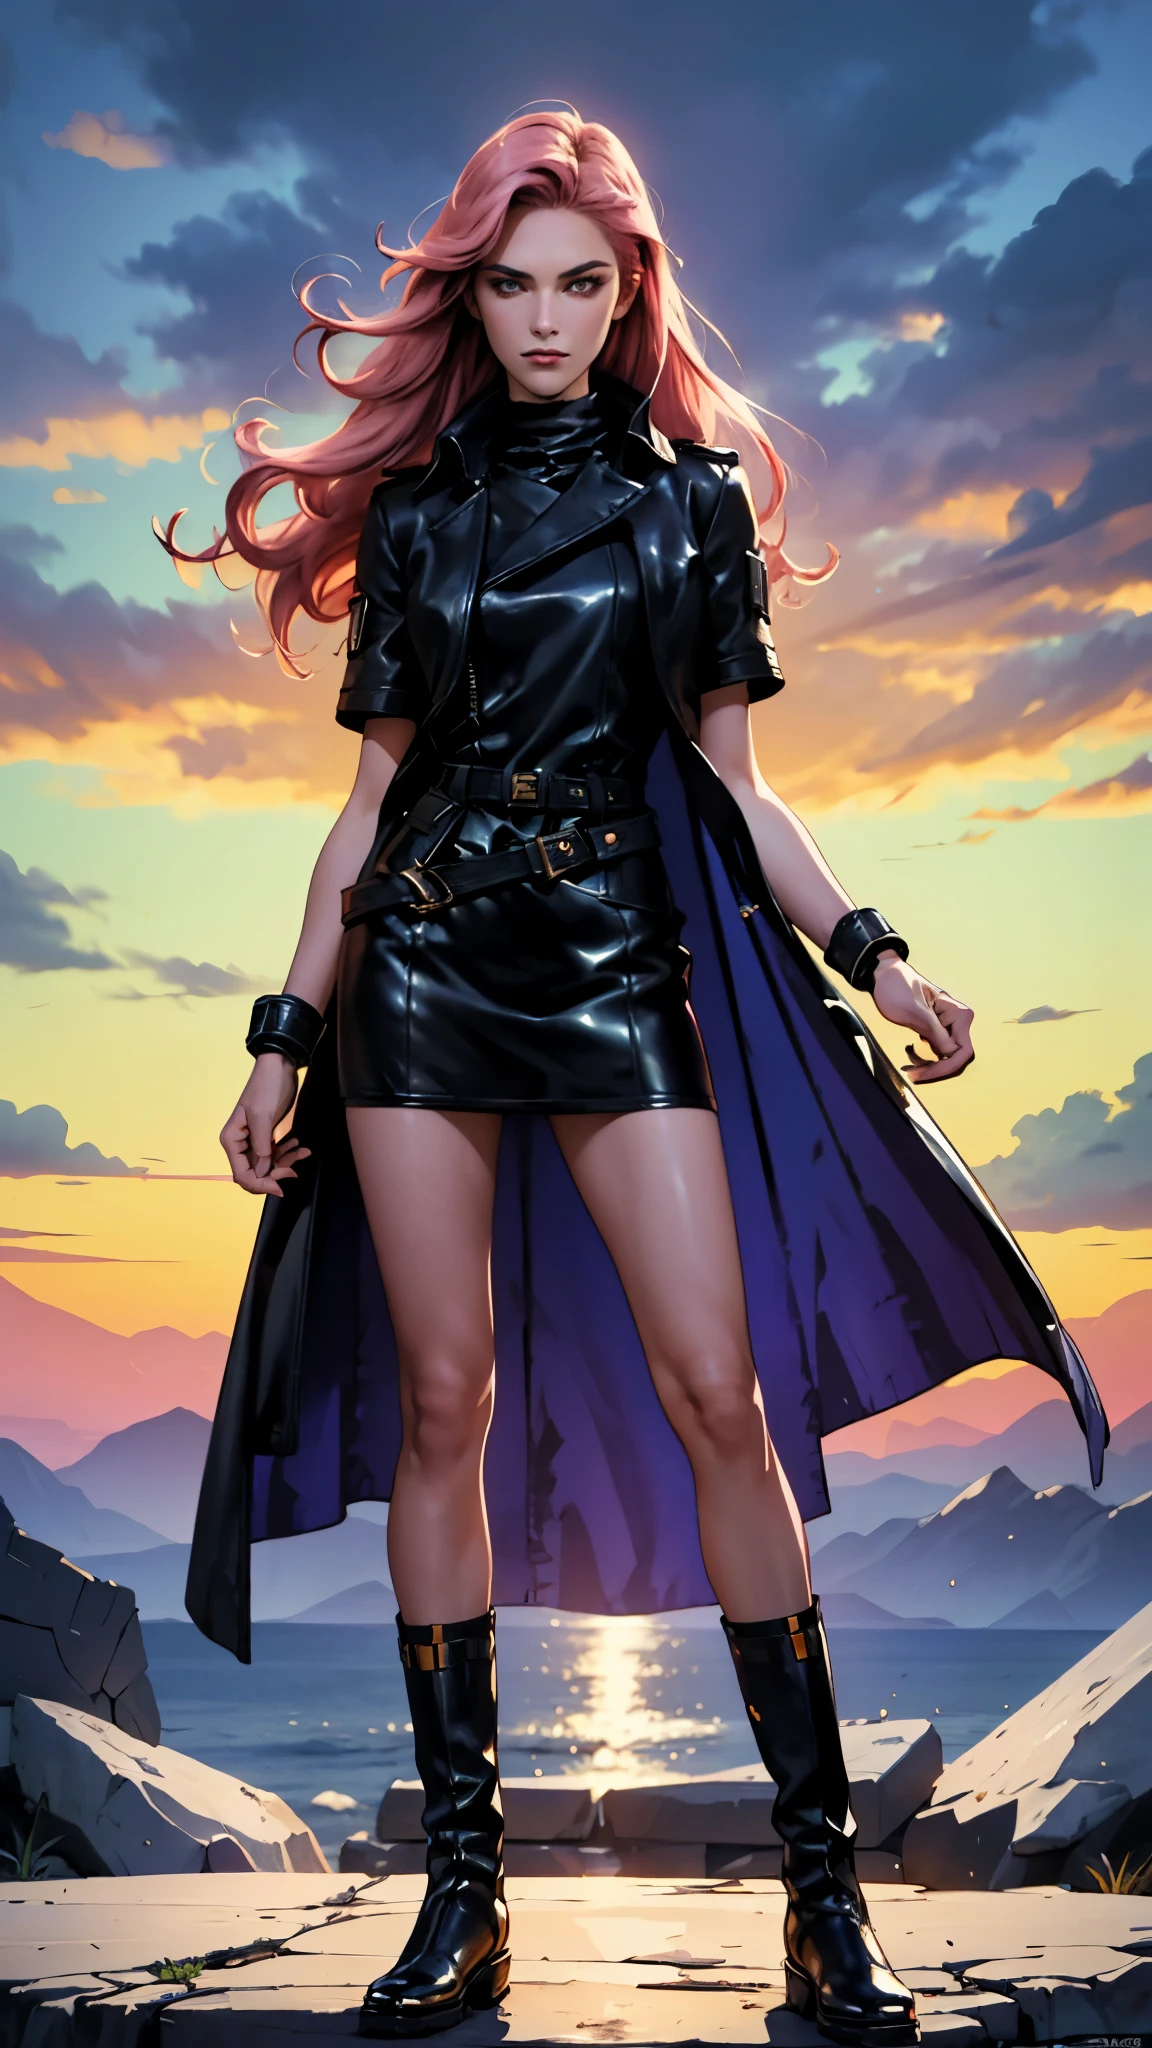 (A beautiful young girl with long curly pink hair, slender eyebrows, sparkling eyes, a bewildered expression, an oval-shapedl face with pale skin, a knee-length form-fitting leather trench coat with very short sleeves, she adorns both hands with metallic wrist guards in a sci-fi ancient civilization style, her long legs are clad in leather boots as she soars through the misty clouds), this character embodies a finely crafted fantasy-realism style western ranger in anime style, exquisite and mature manga art style, porcelain skin, perfect skin, perfect eyes, high definition, best quality, highres, ultra-detailed, ultra-fine painting, extremely delicate, professional, anatomically correct, symmetrical face, extremely detailed eyes and face, high quality eyes, creativity, RAW photo, UHD, 32k, Natural light, cinematic lighting, masterpiece-anatomy-perfect, masterpiece:1.5